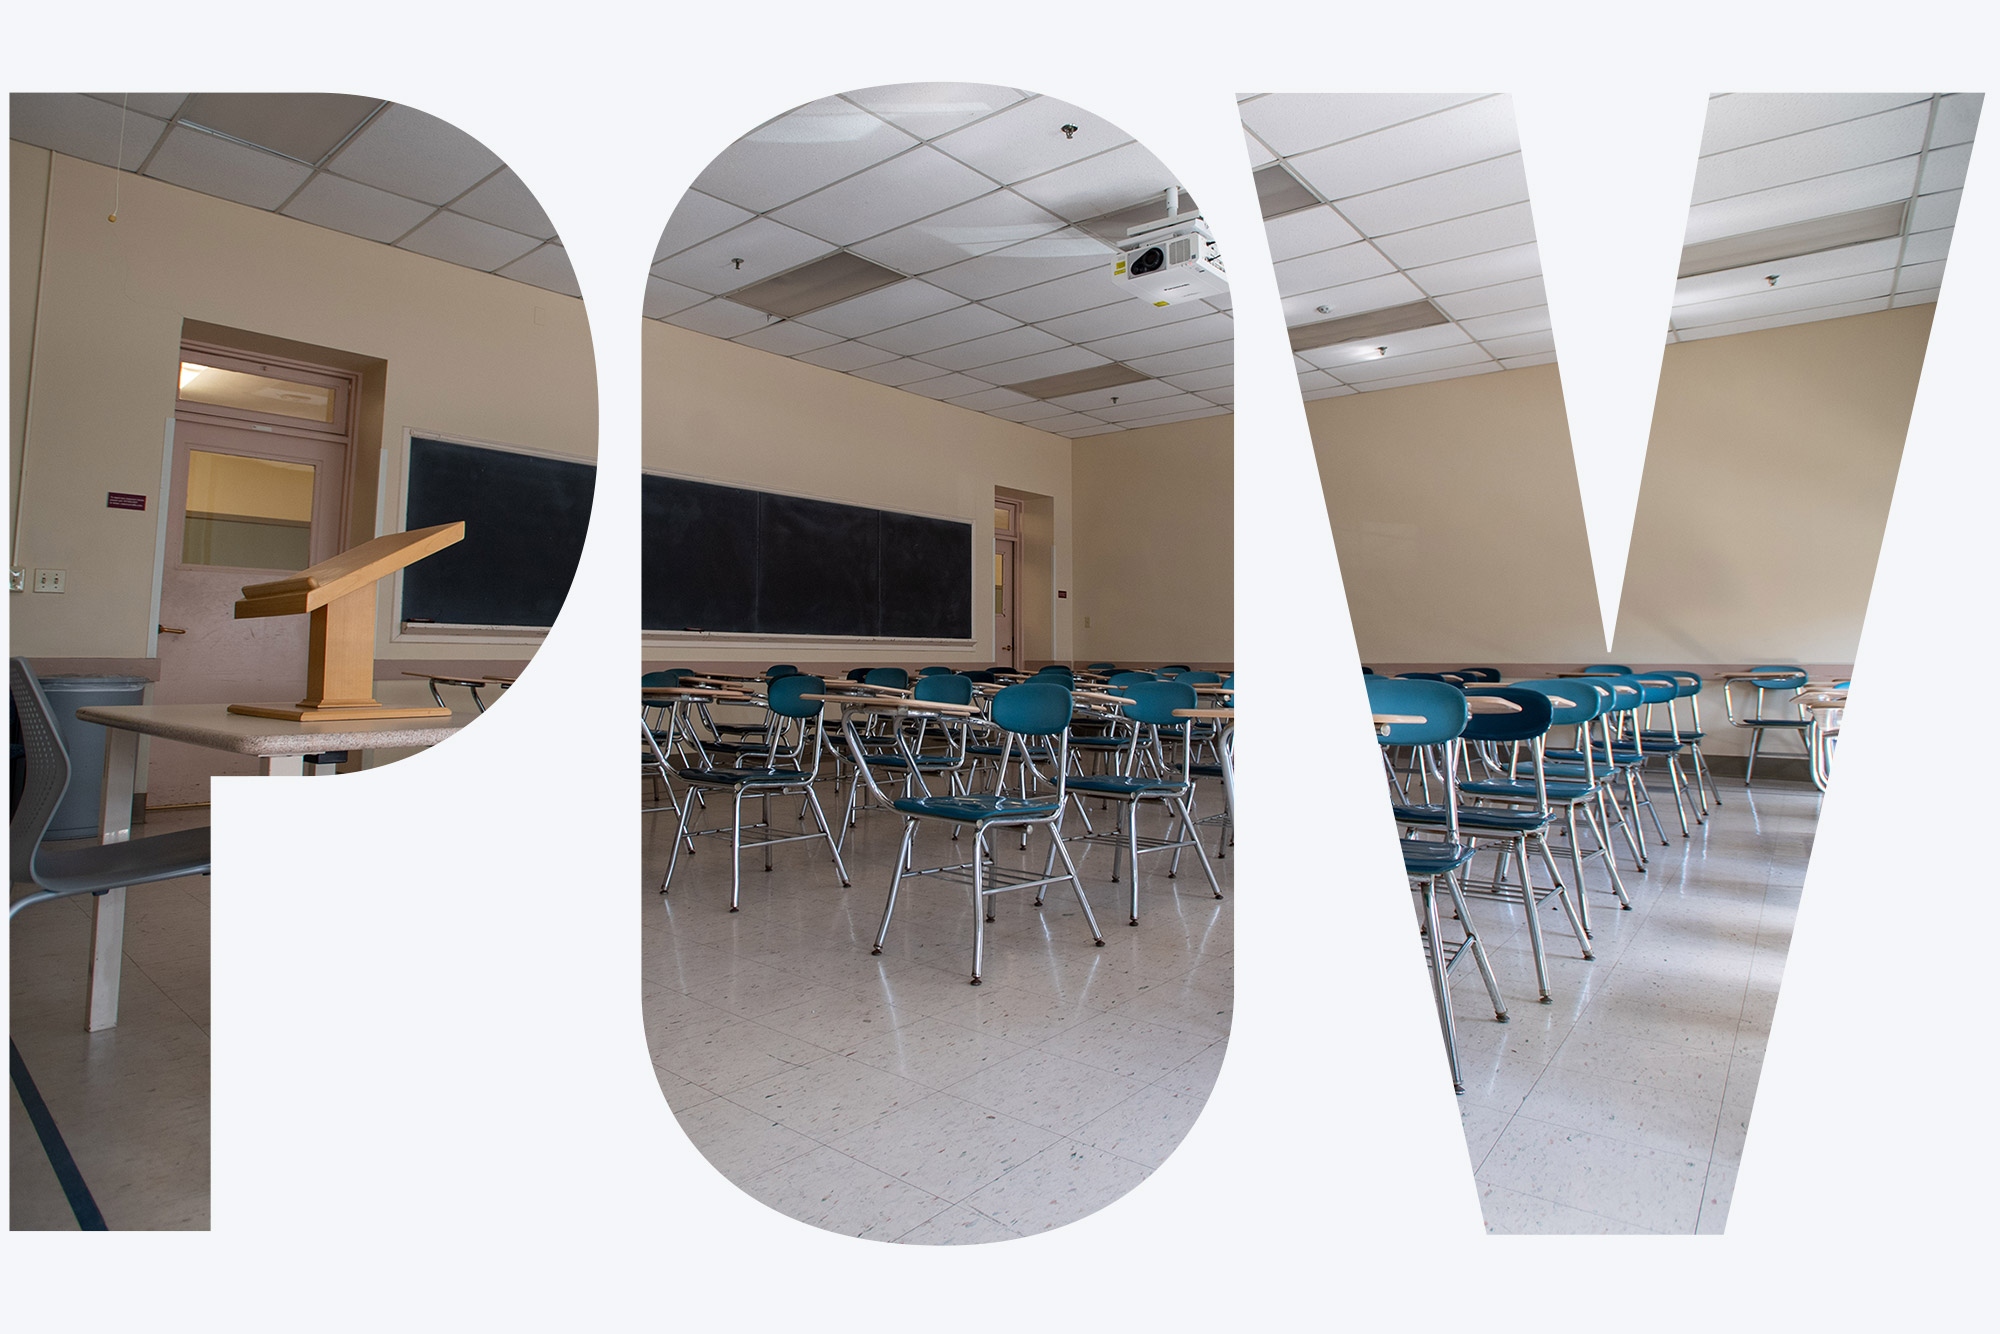 Photo of an empty classroom from inside CAS March 18, 2020, after campus cleared out due to the pandemic. A professor's podium sits at the front of a classroom of rows of teal single-person desks. Overlay reads: "POV"